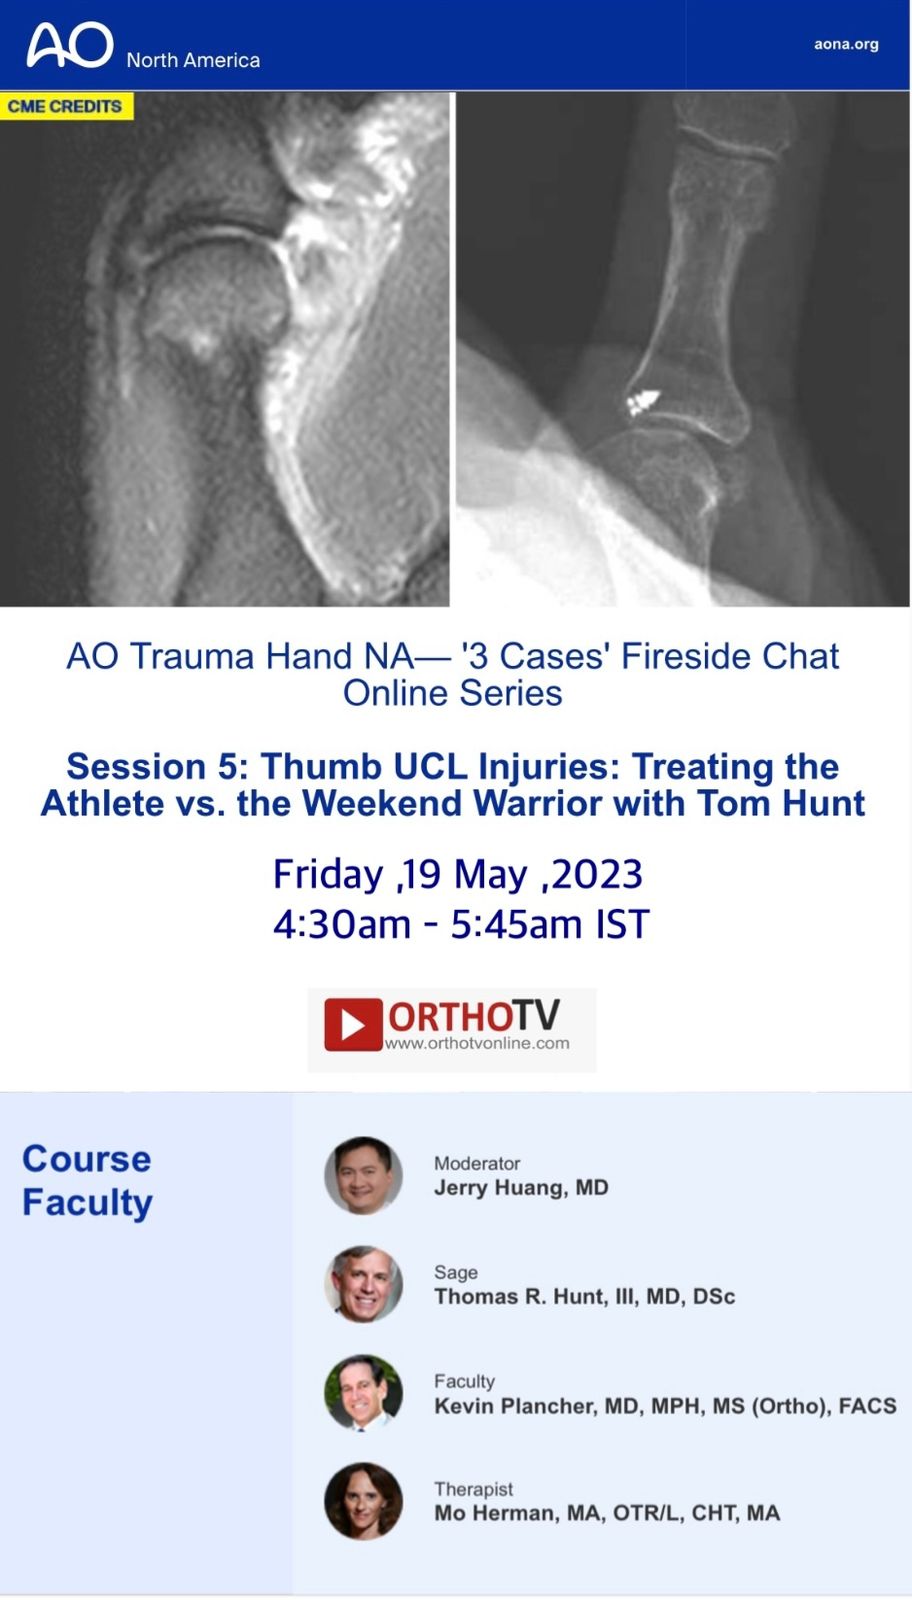 AO Trauma Hand NA- Thumb UCL Injuries: Treating the Athlete vs. the Weekend Warrior with Tom Hunt